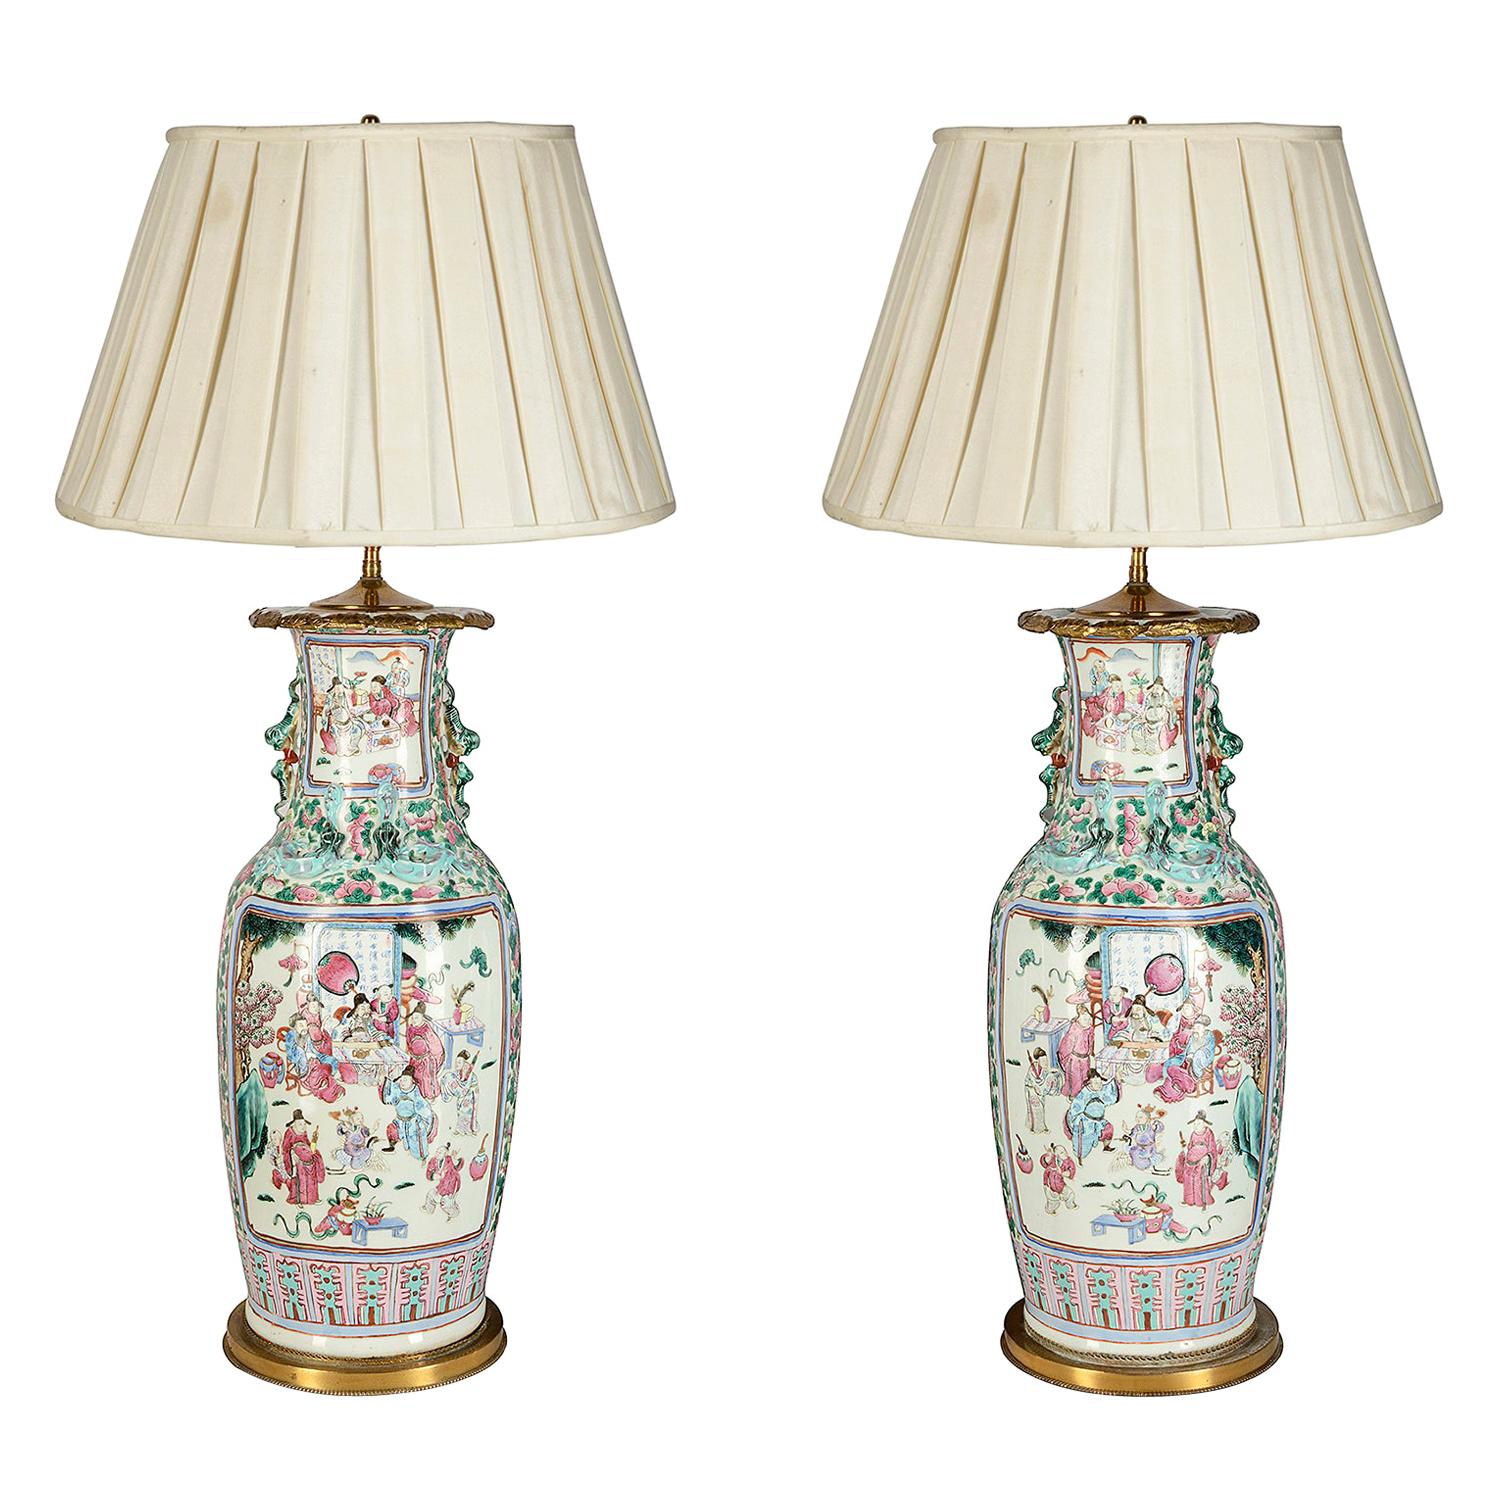 Pair of 19th Century Chinese Famille Rose Vase/Lamps